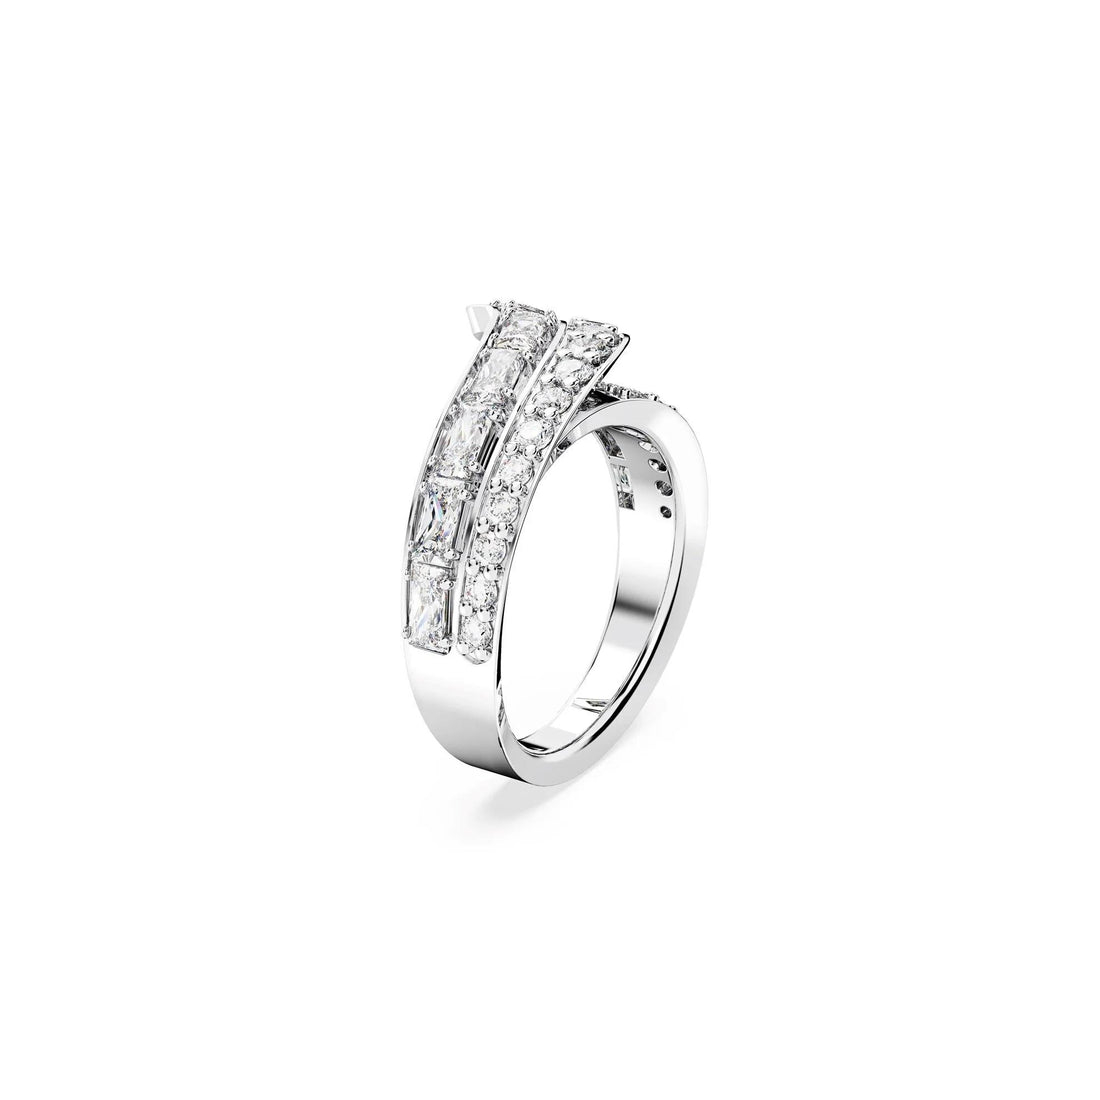 Hyperbola cocktail ring, Carbon neutral zirconia, Mixed cuts, Double bands, White, Rhodium plated 55 5665347